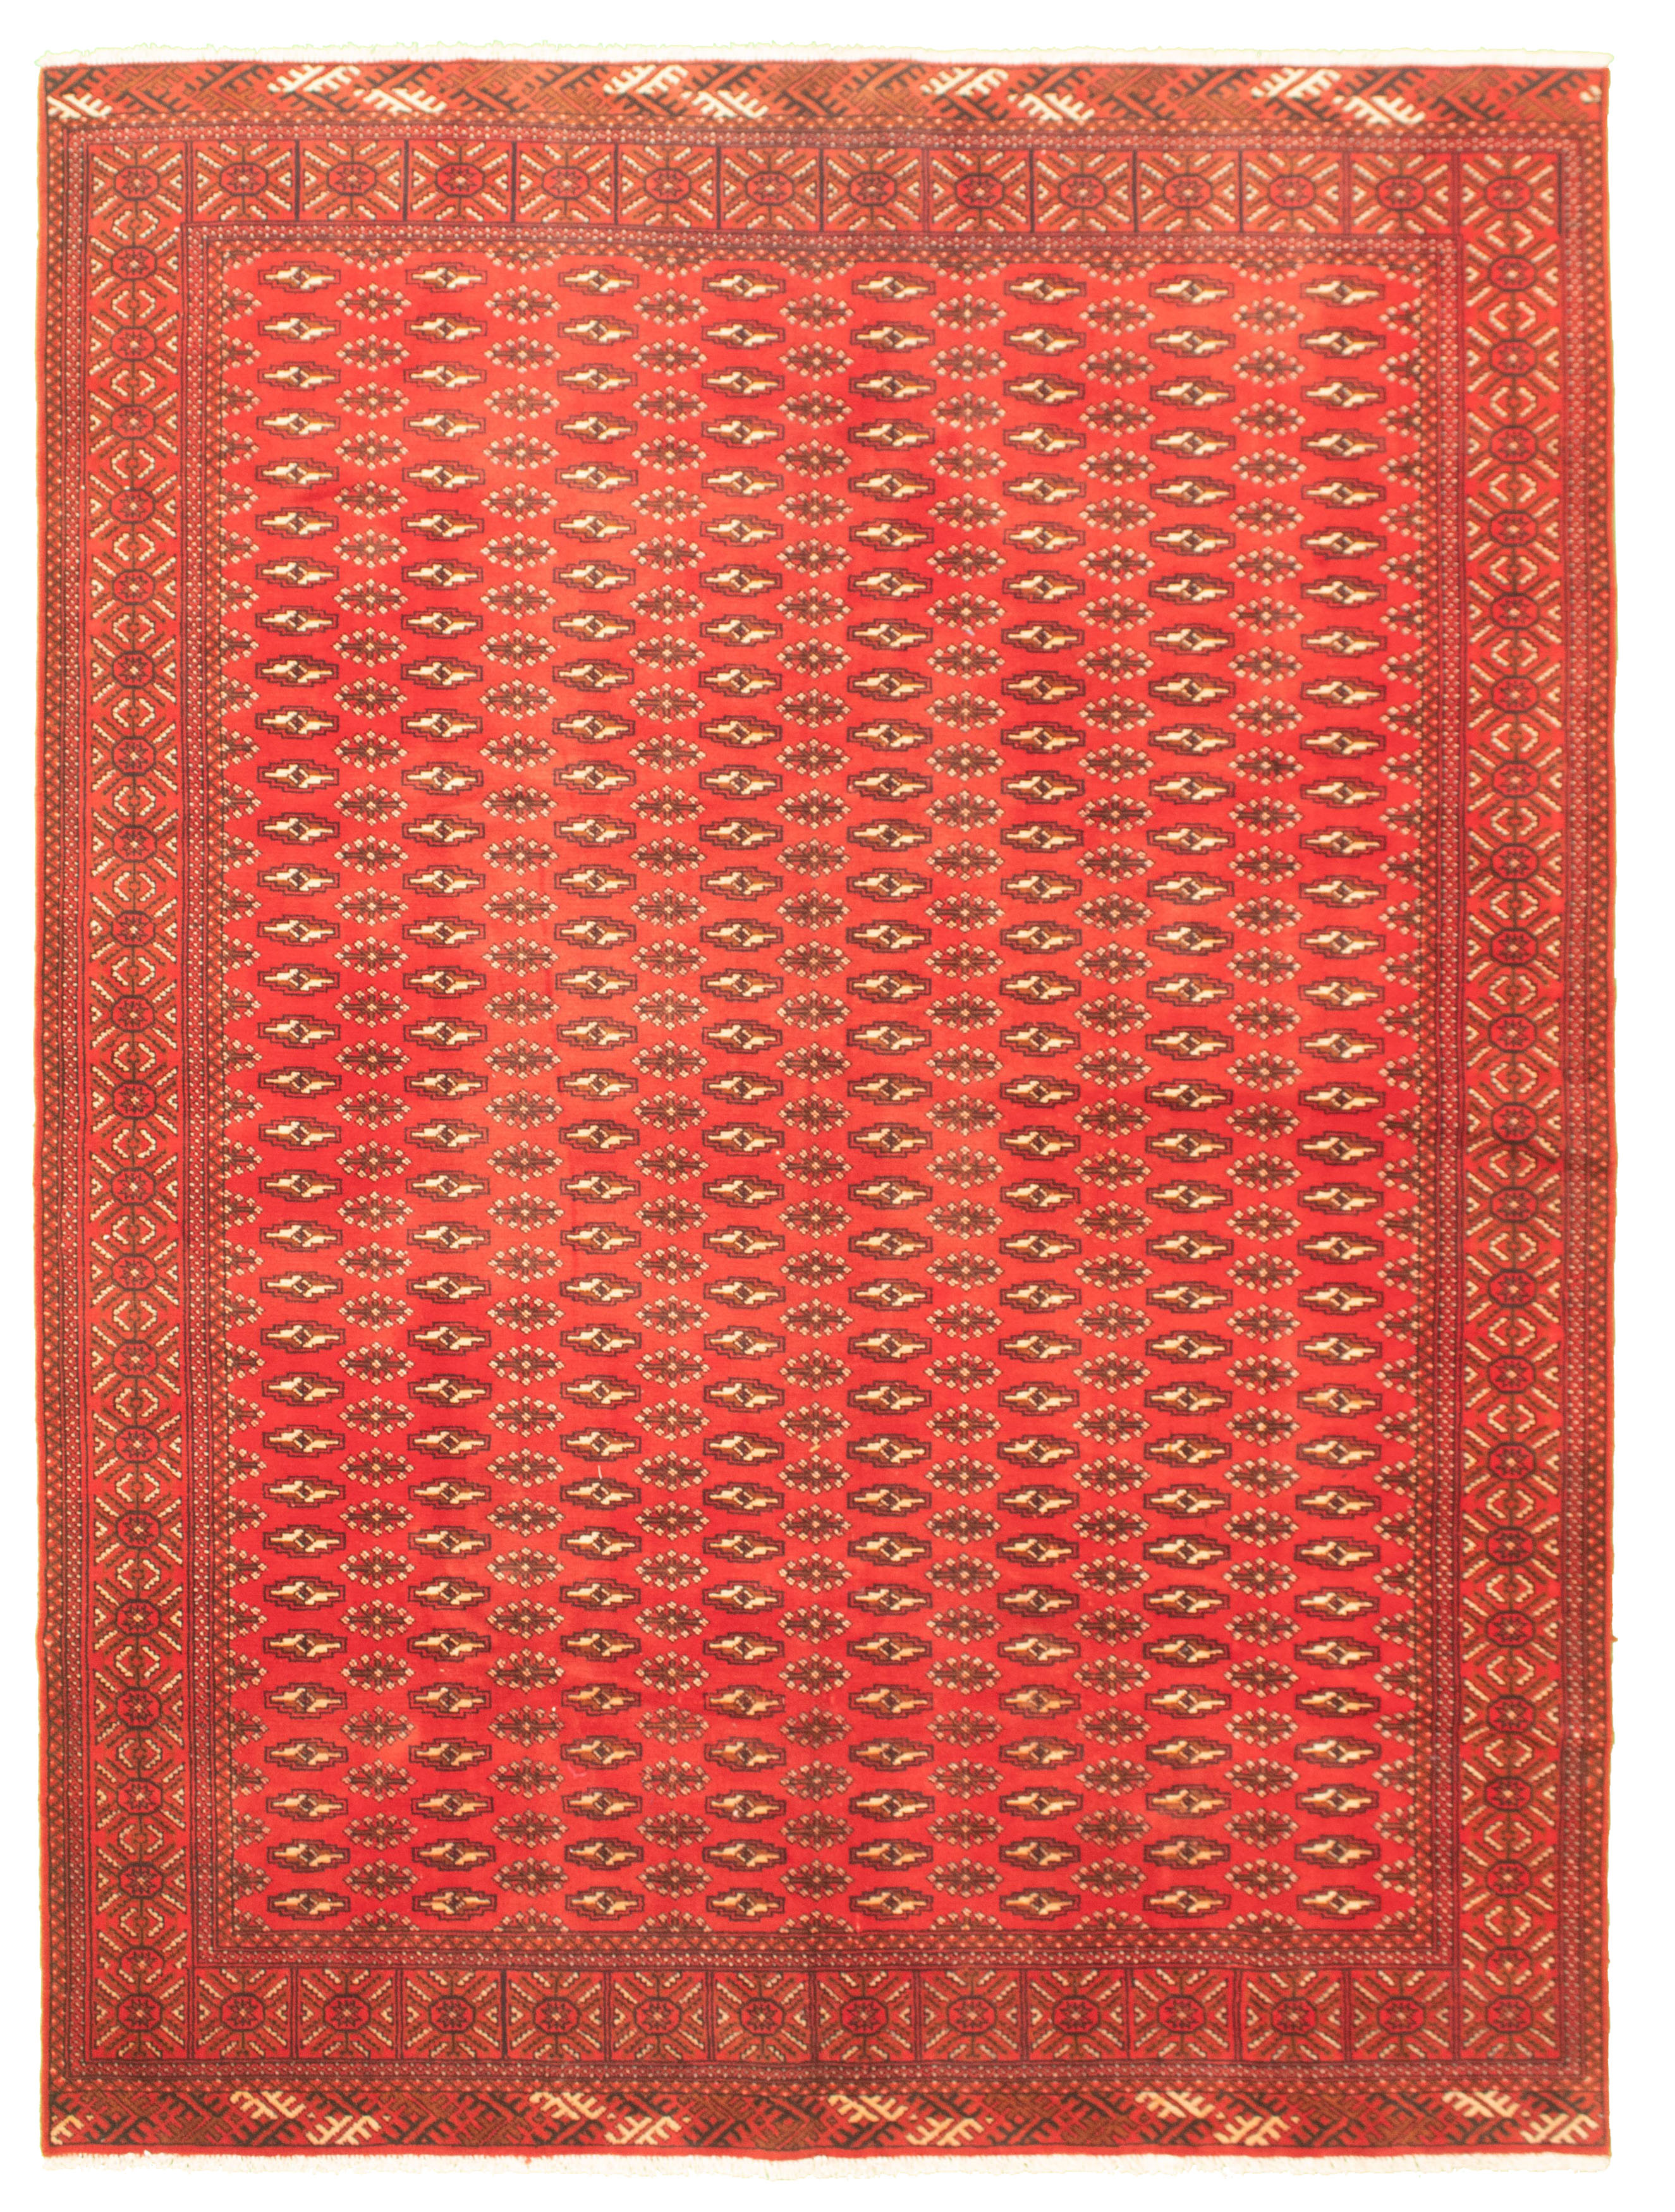 Hand-knotted Shiravan Bokhara Red Wool Rug 6'6" x 9'1" Size: 6'6" x 9'1"  